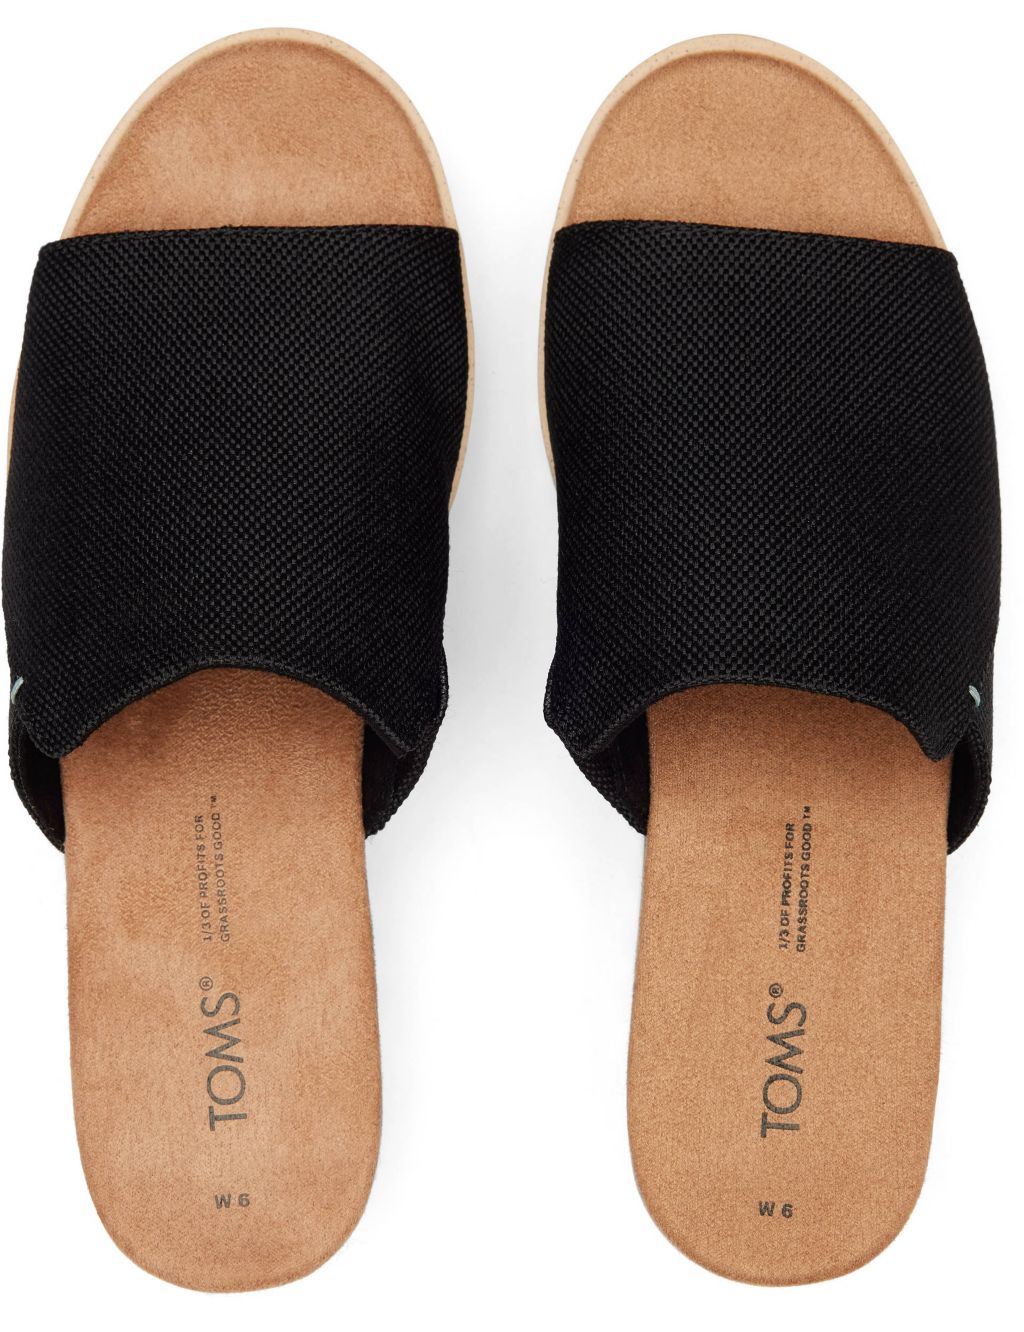 Canvas Wedge Mules image 5